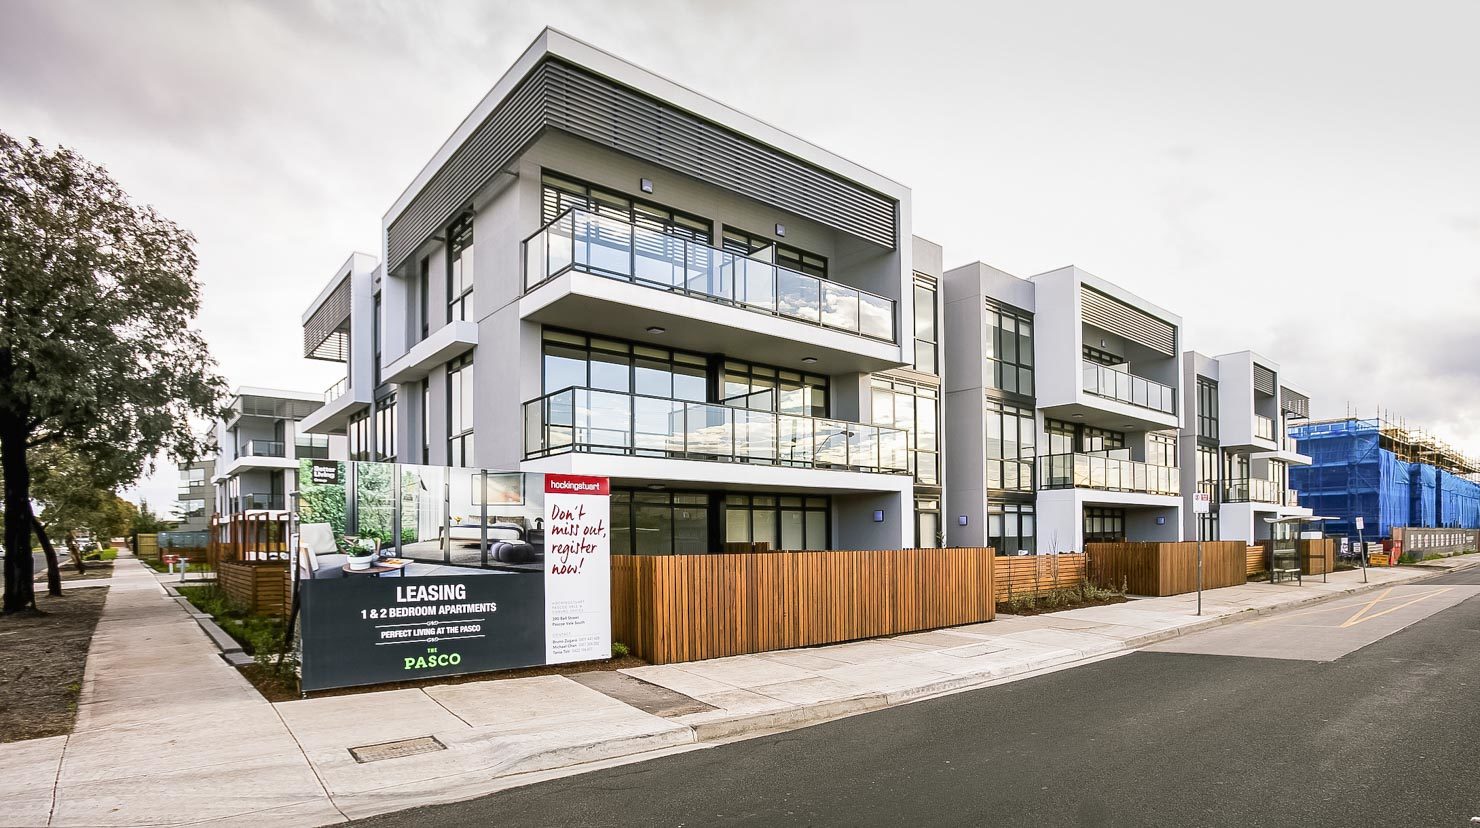 The Pasco Apartment Development under constrauction at Cumberland Road Pascoe Vale